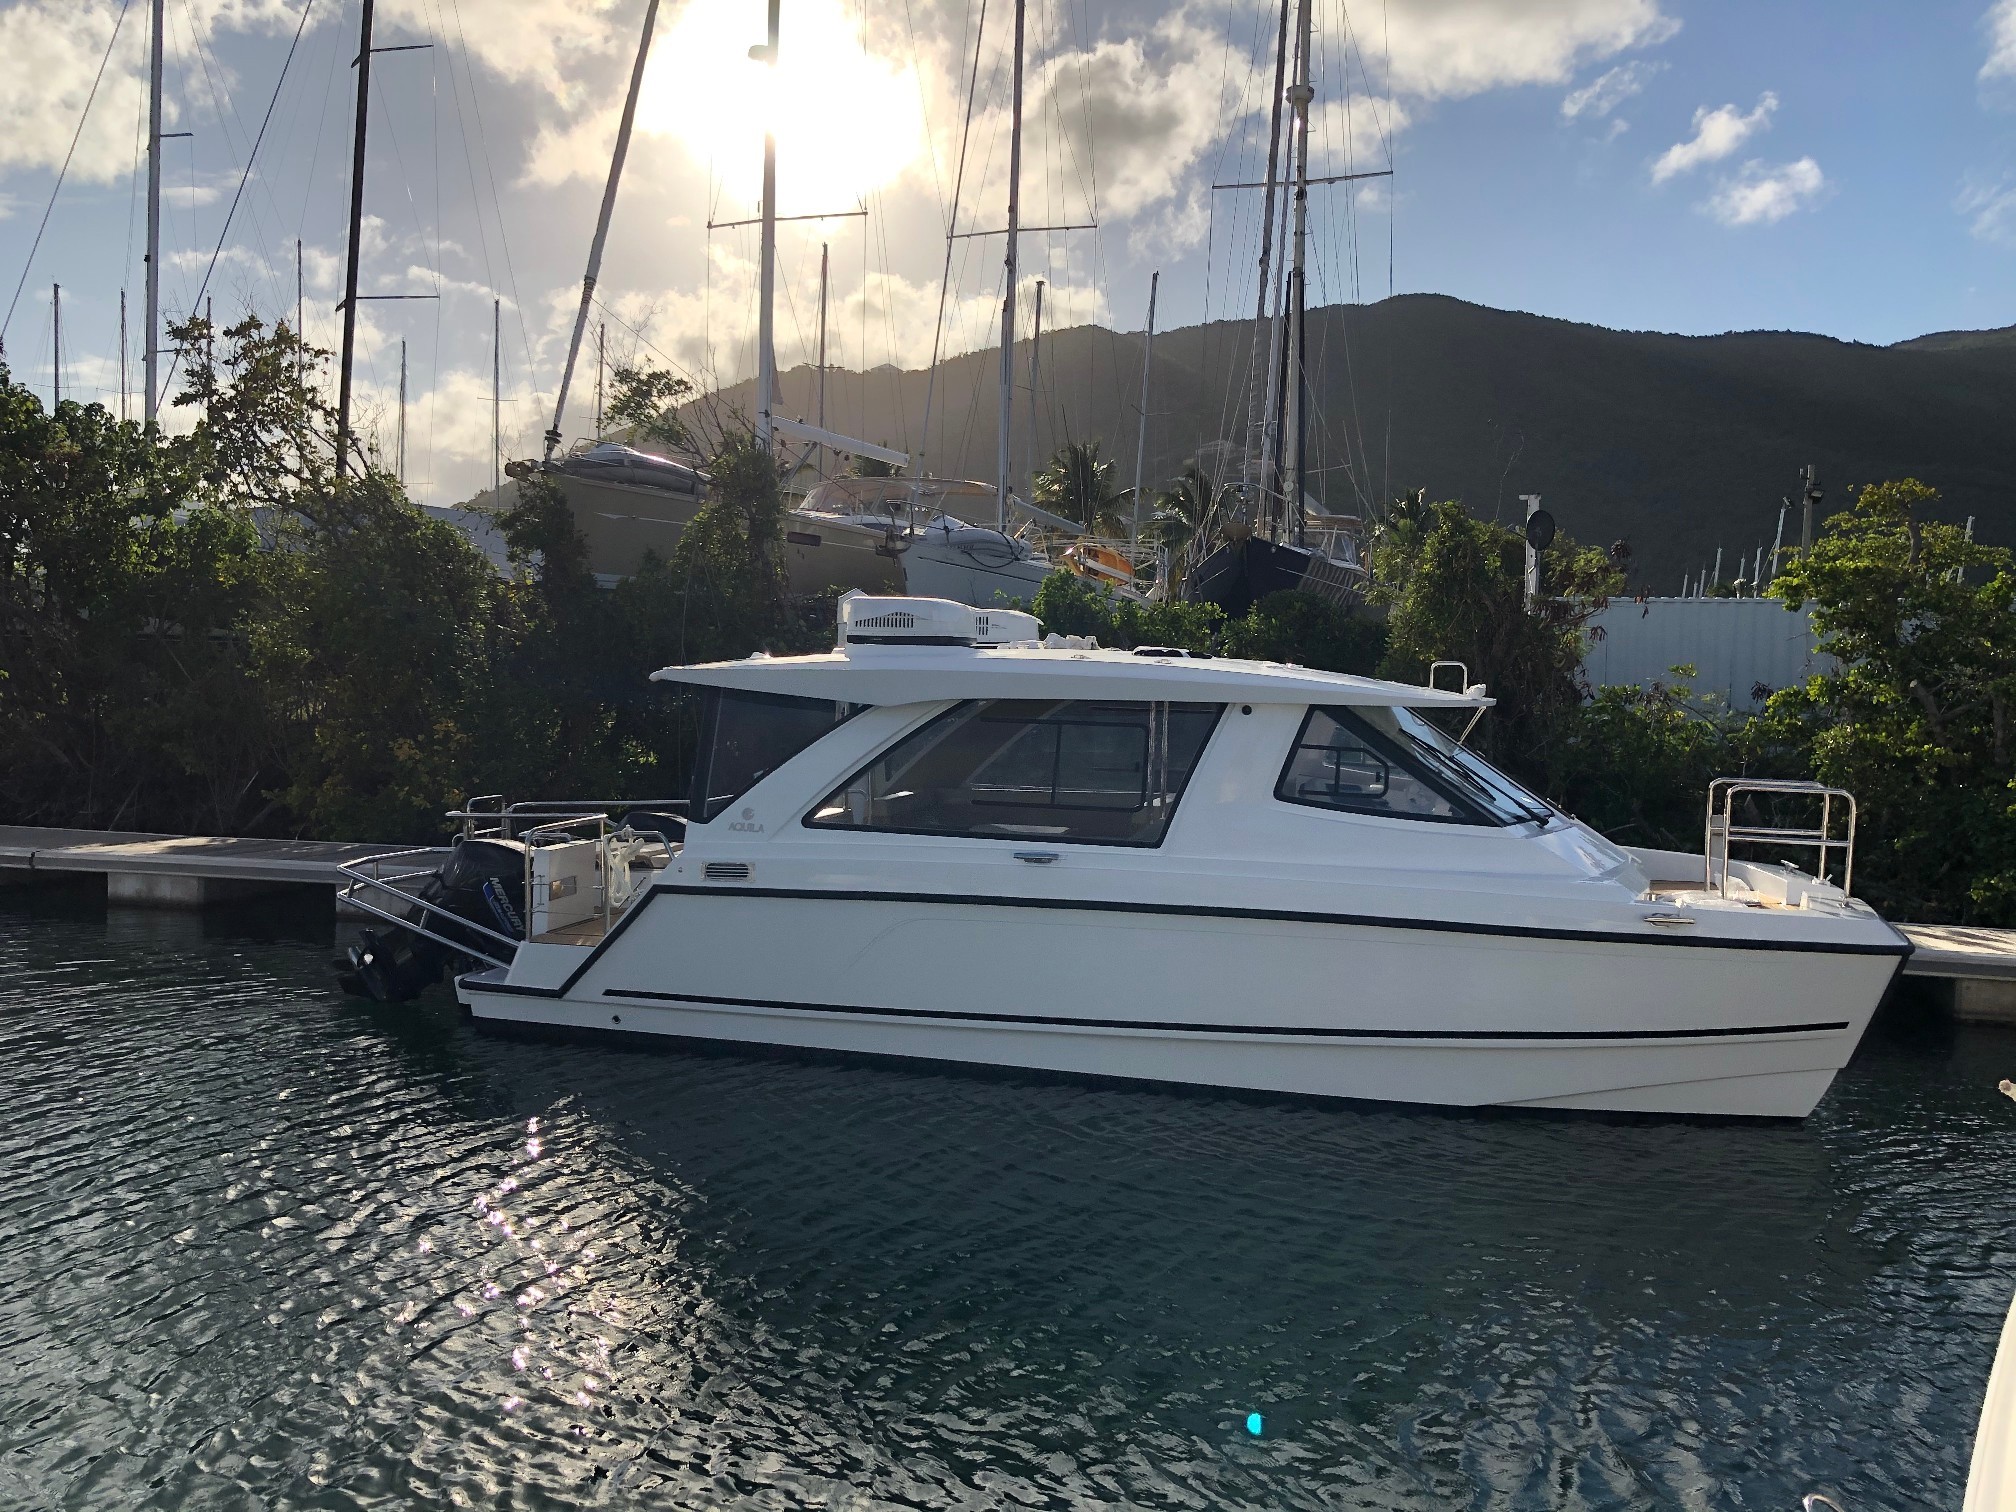 New Power Catamaran for Sale 2020 AQUILA 36 EXCURSION Boat Highlights